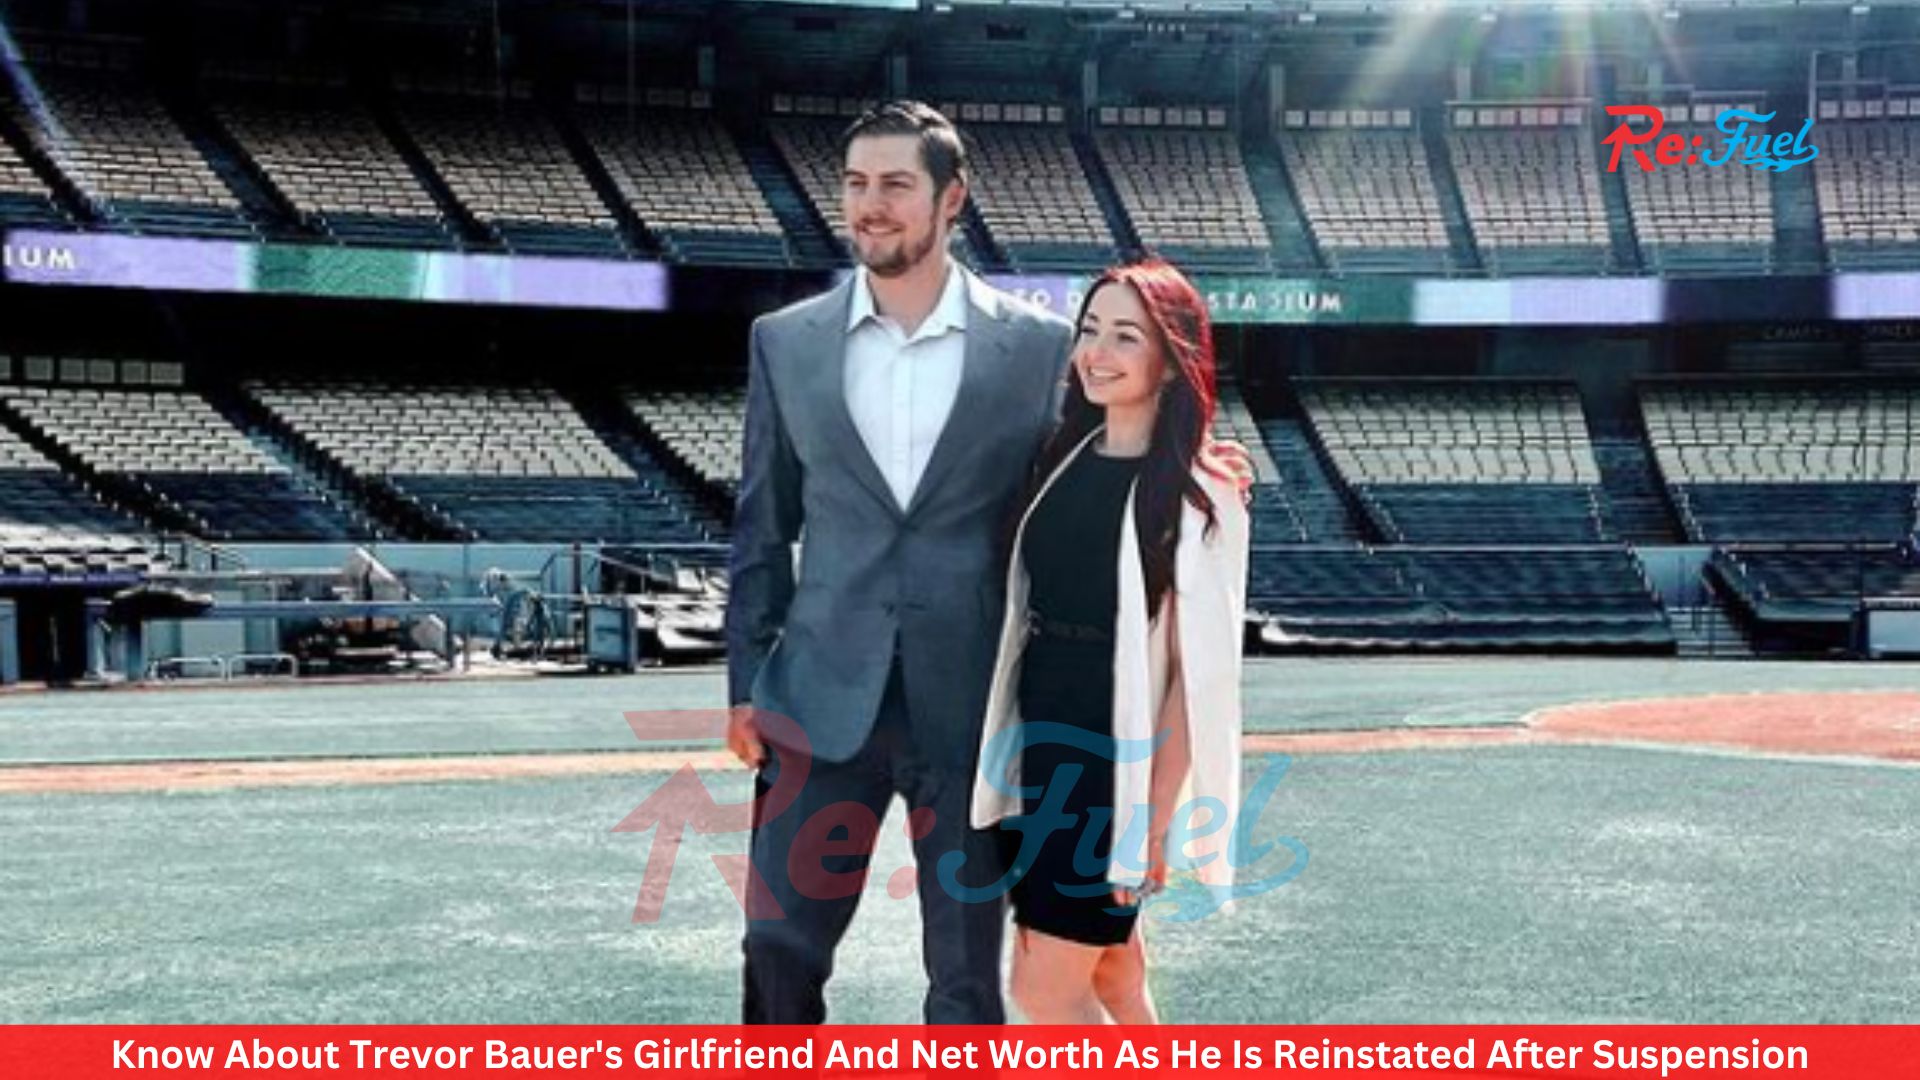 Know About Trevor Bauer's Girlfriend And Net Worth As He Is Reinstated After Suspension